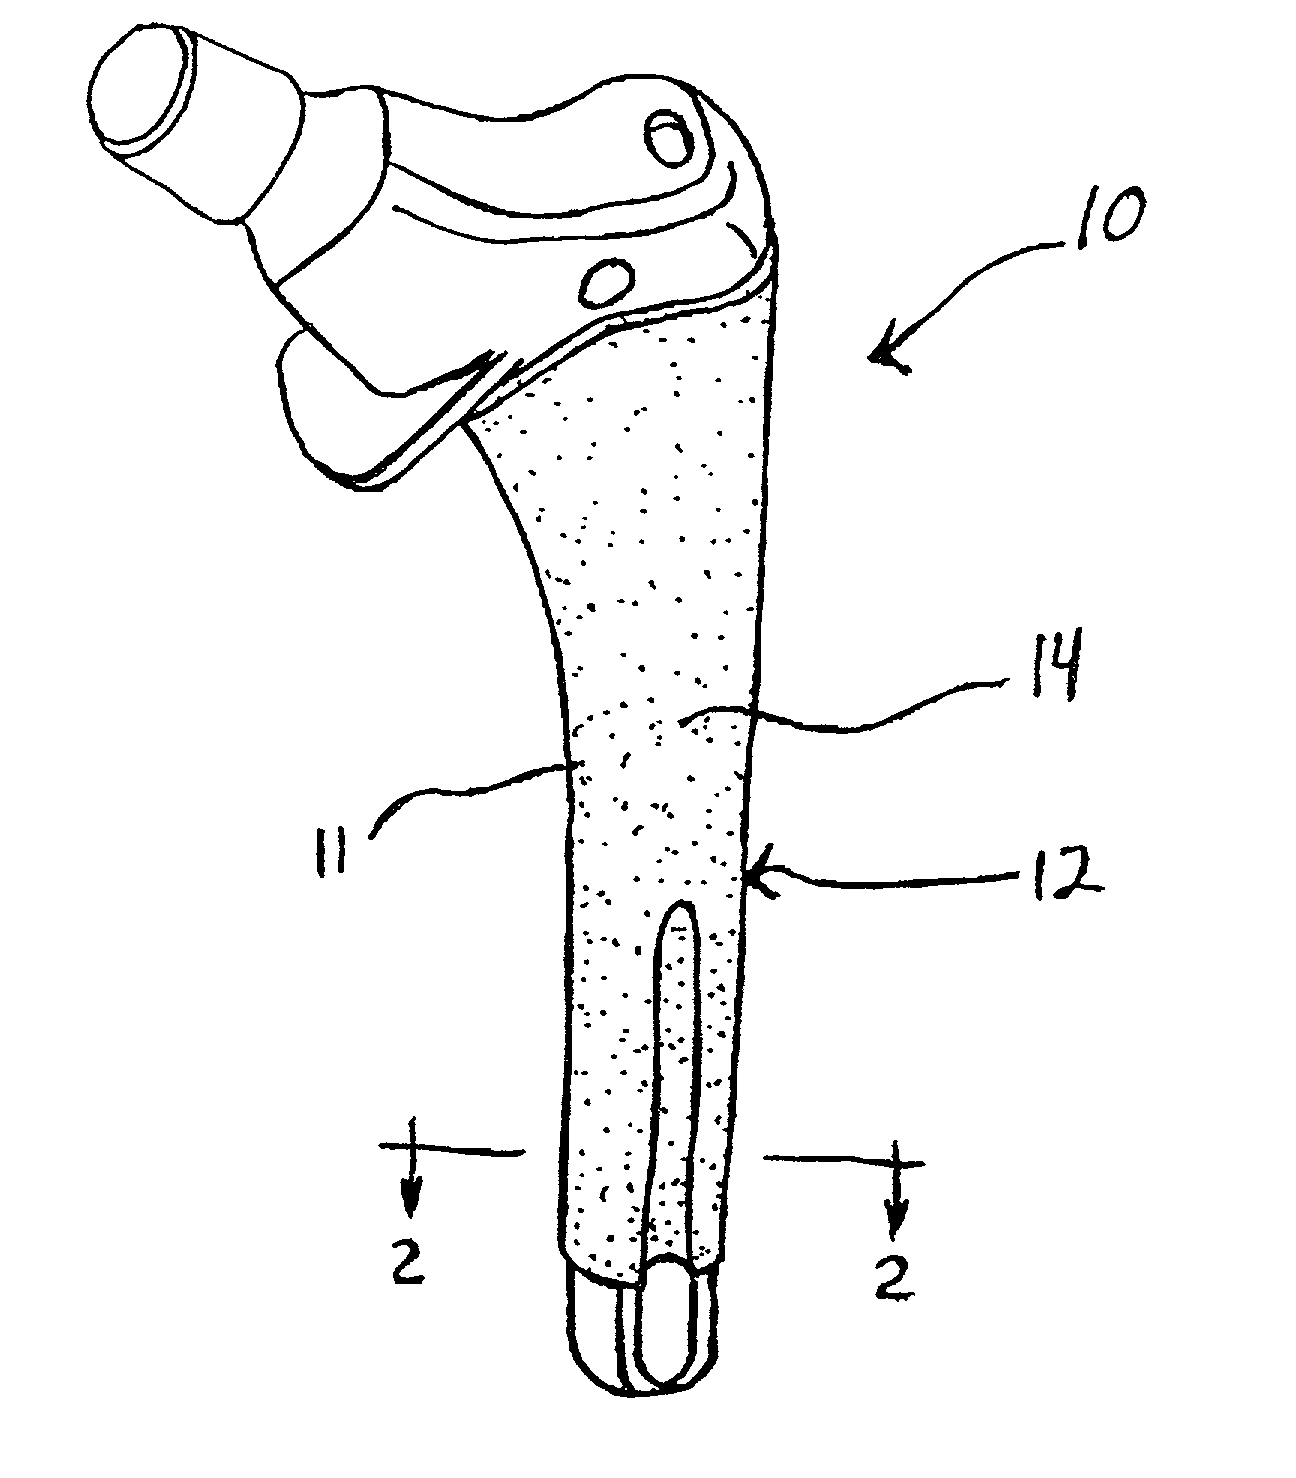 Enhanced fatigue strength orthopaedic implant with porous coating and method of making same